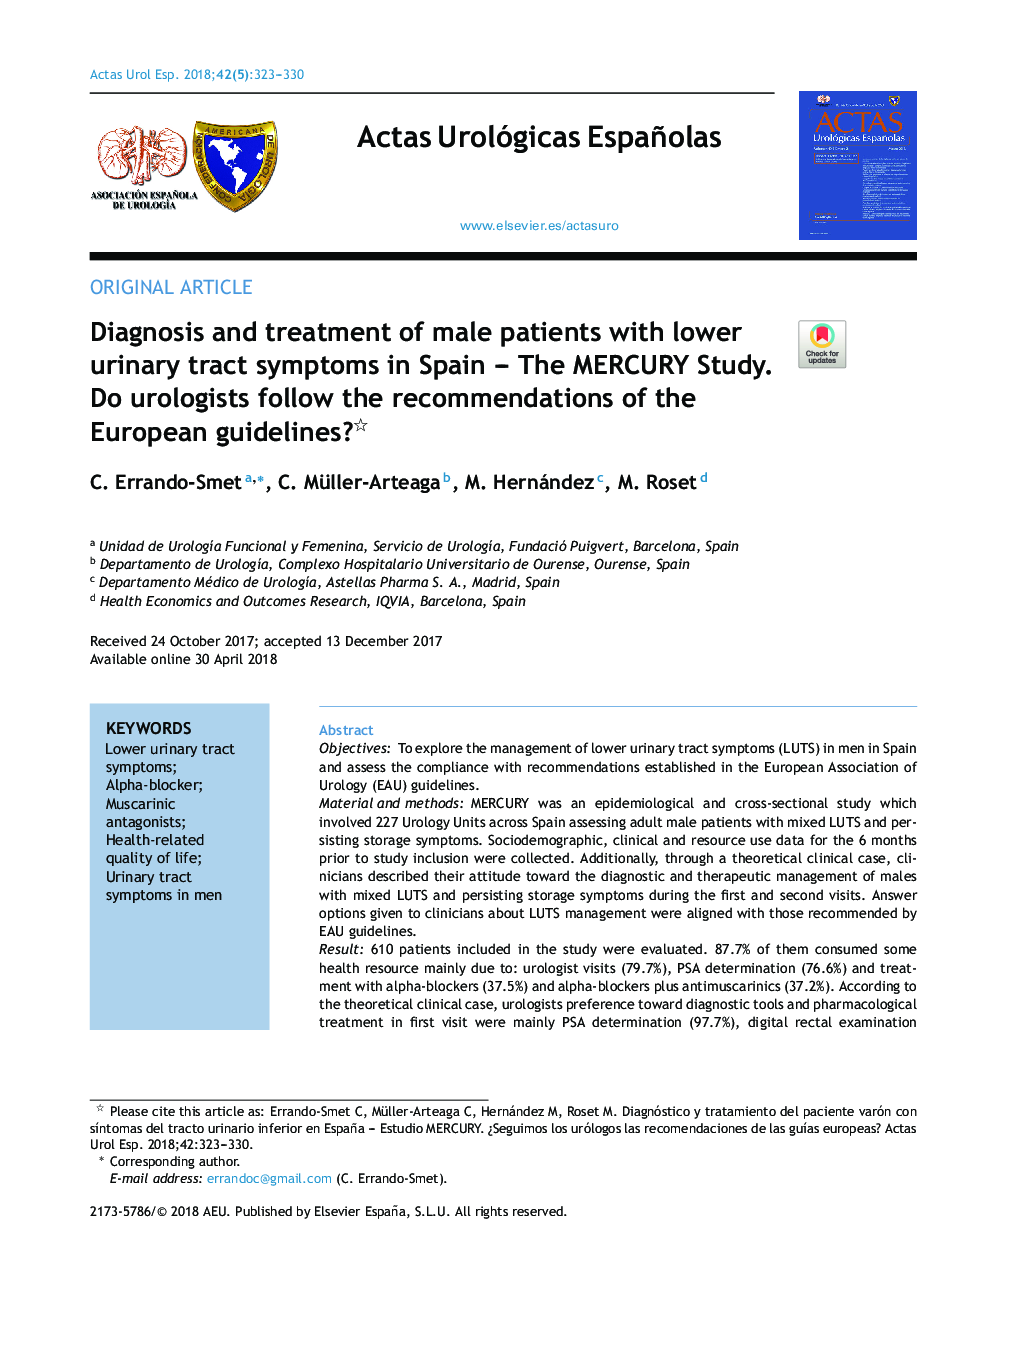 Diagnosis and treatment of male patients with lower urinary tract symptoms in Spain - The MERCURY Study. Do urologists follow the recommendations of the European guidelines?